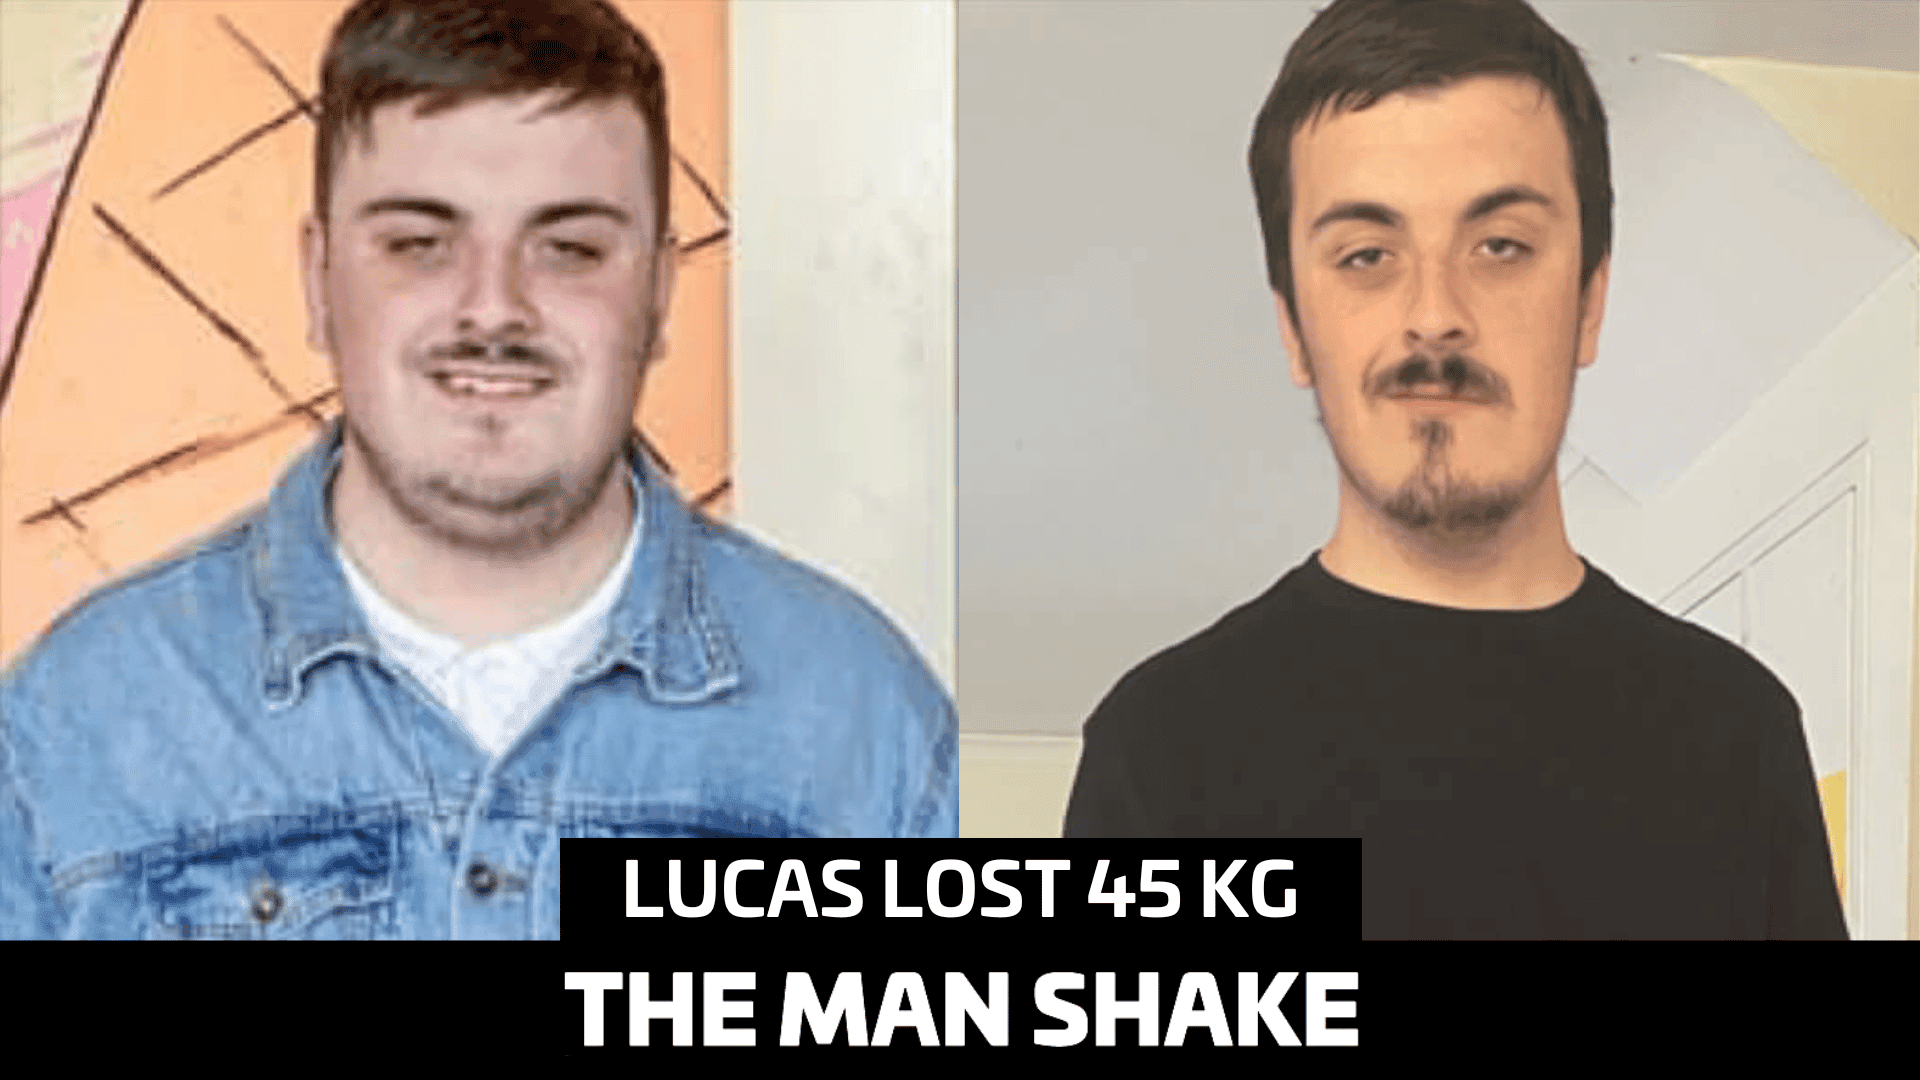 Lucas took the leap and lost 45kg